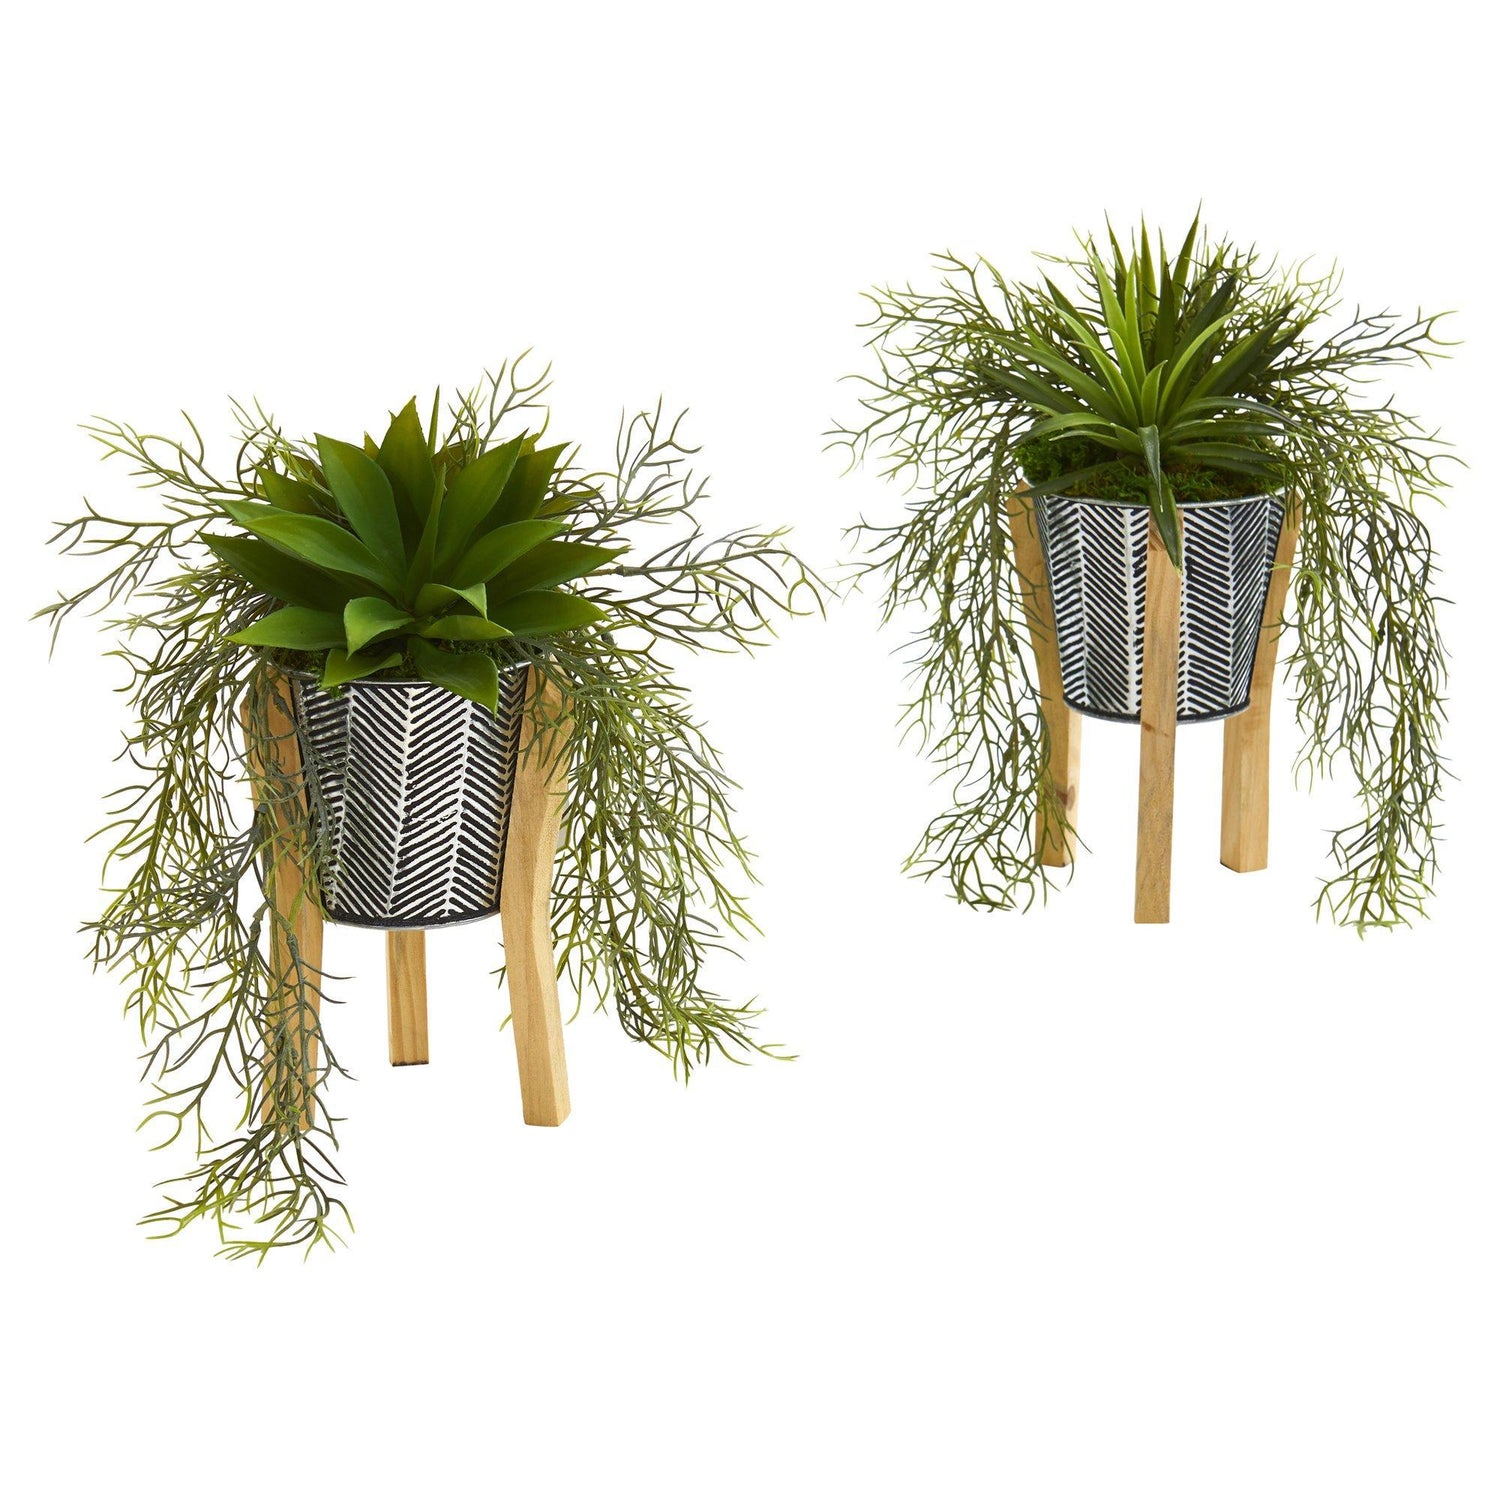 11” Agave Succulent Artificial Plant in Tin Planter with Legs (Set of 2)